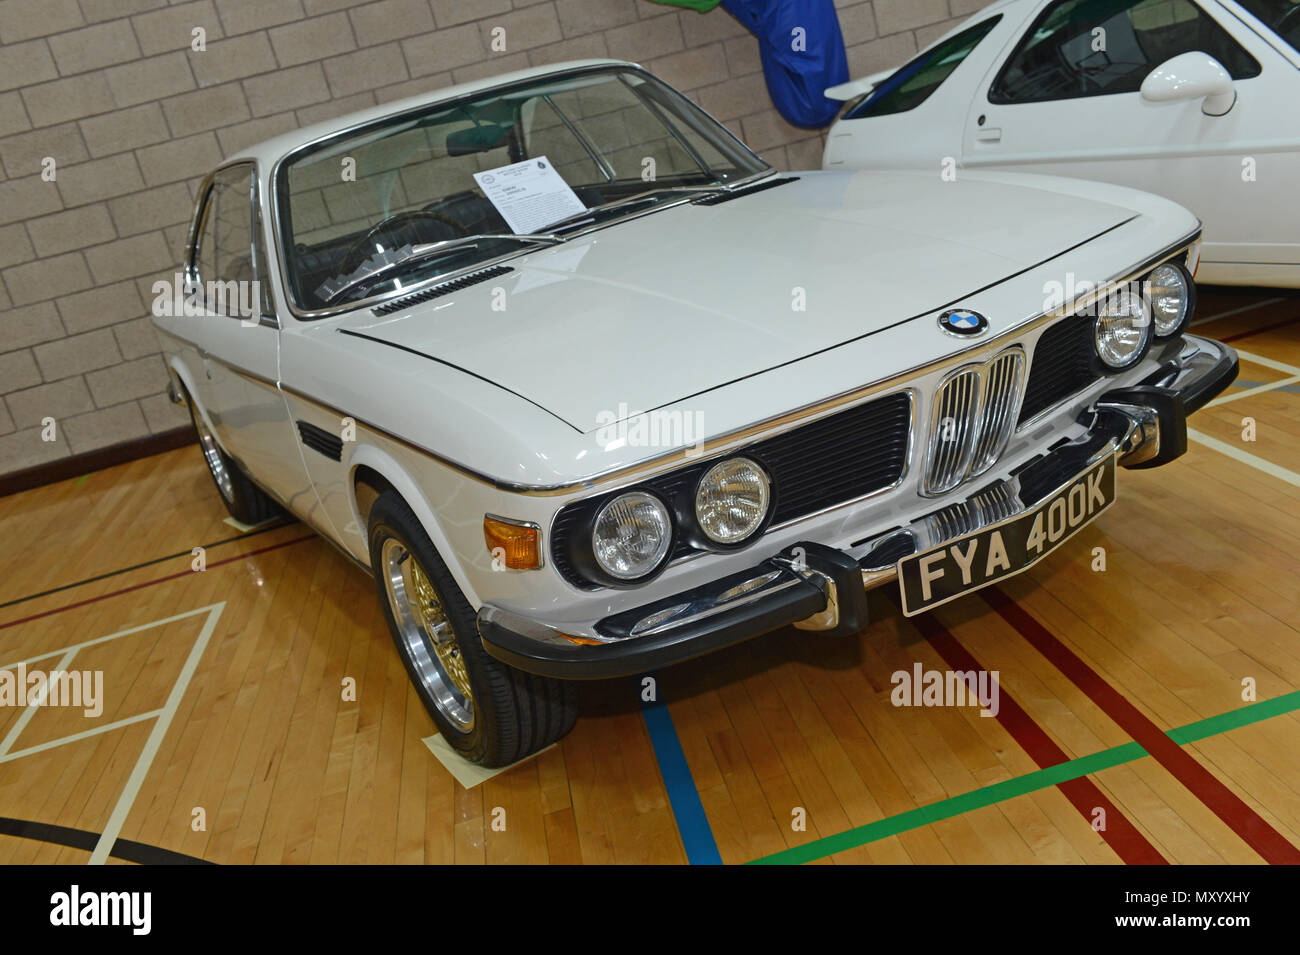 Bmw Cs High Resolution Stock Photography and Images - Alamy